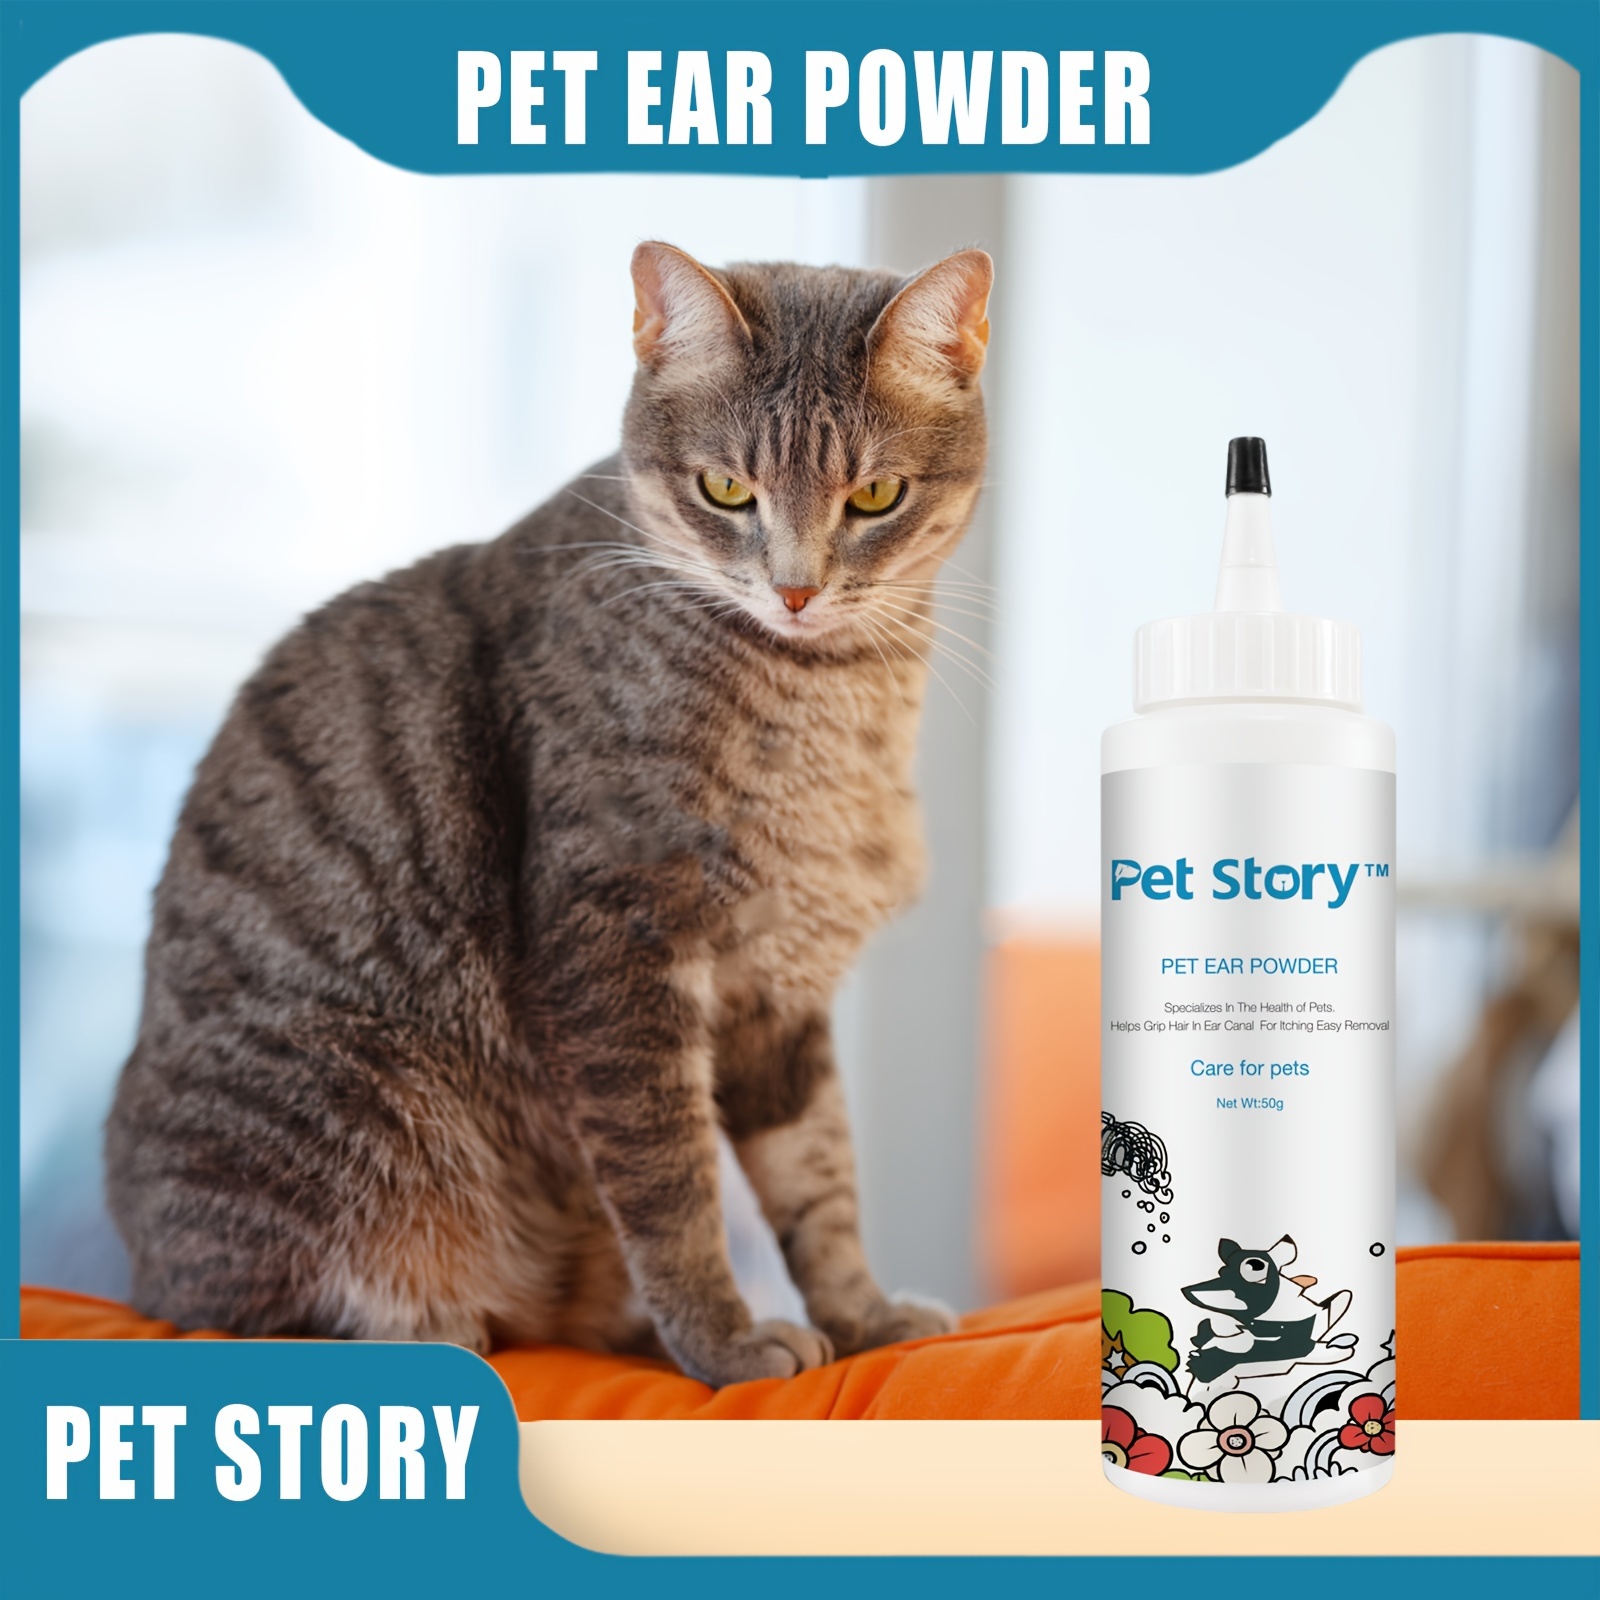 

1pc Pet Story Ear Powder For Dogs And Cats, Gentle Non-irritating Ear Hair Removal, For Easy Application, Cleansing Pet Ear Care Supplies For Teddy, Golden Retriever & More